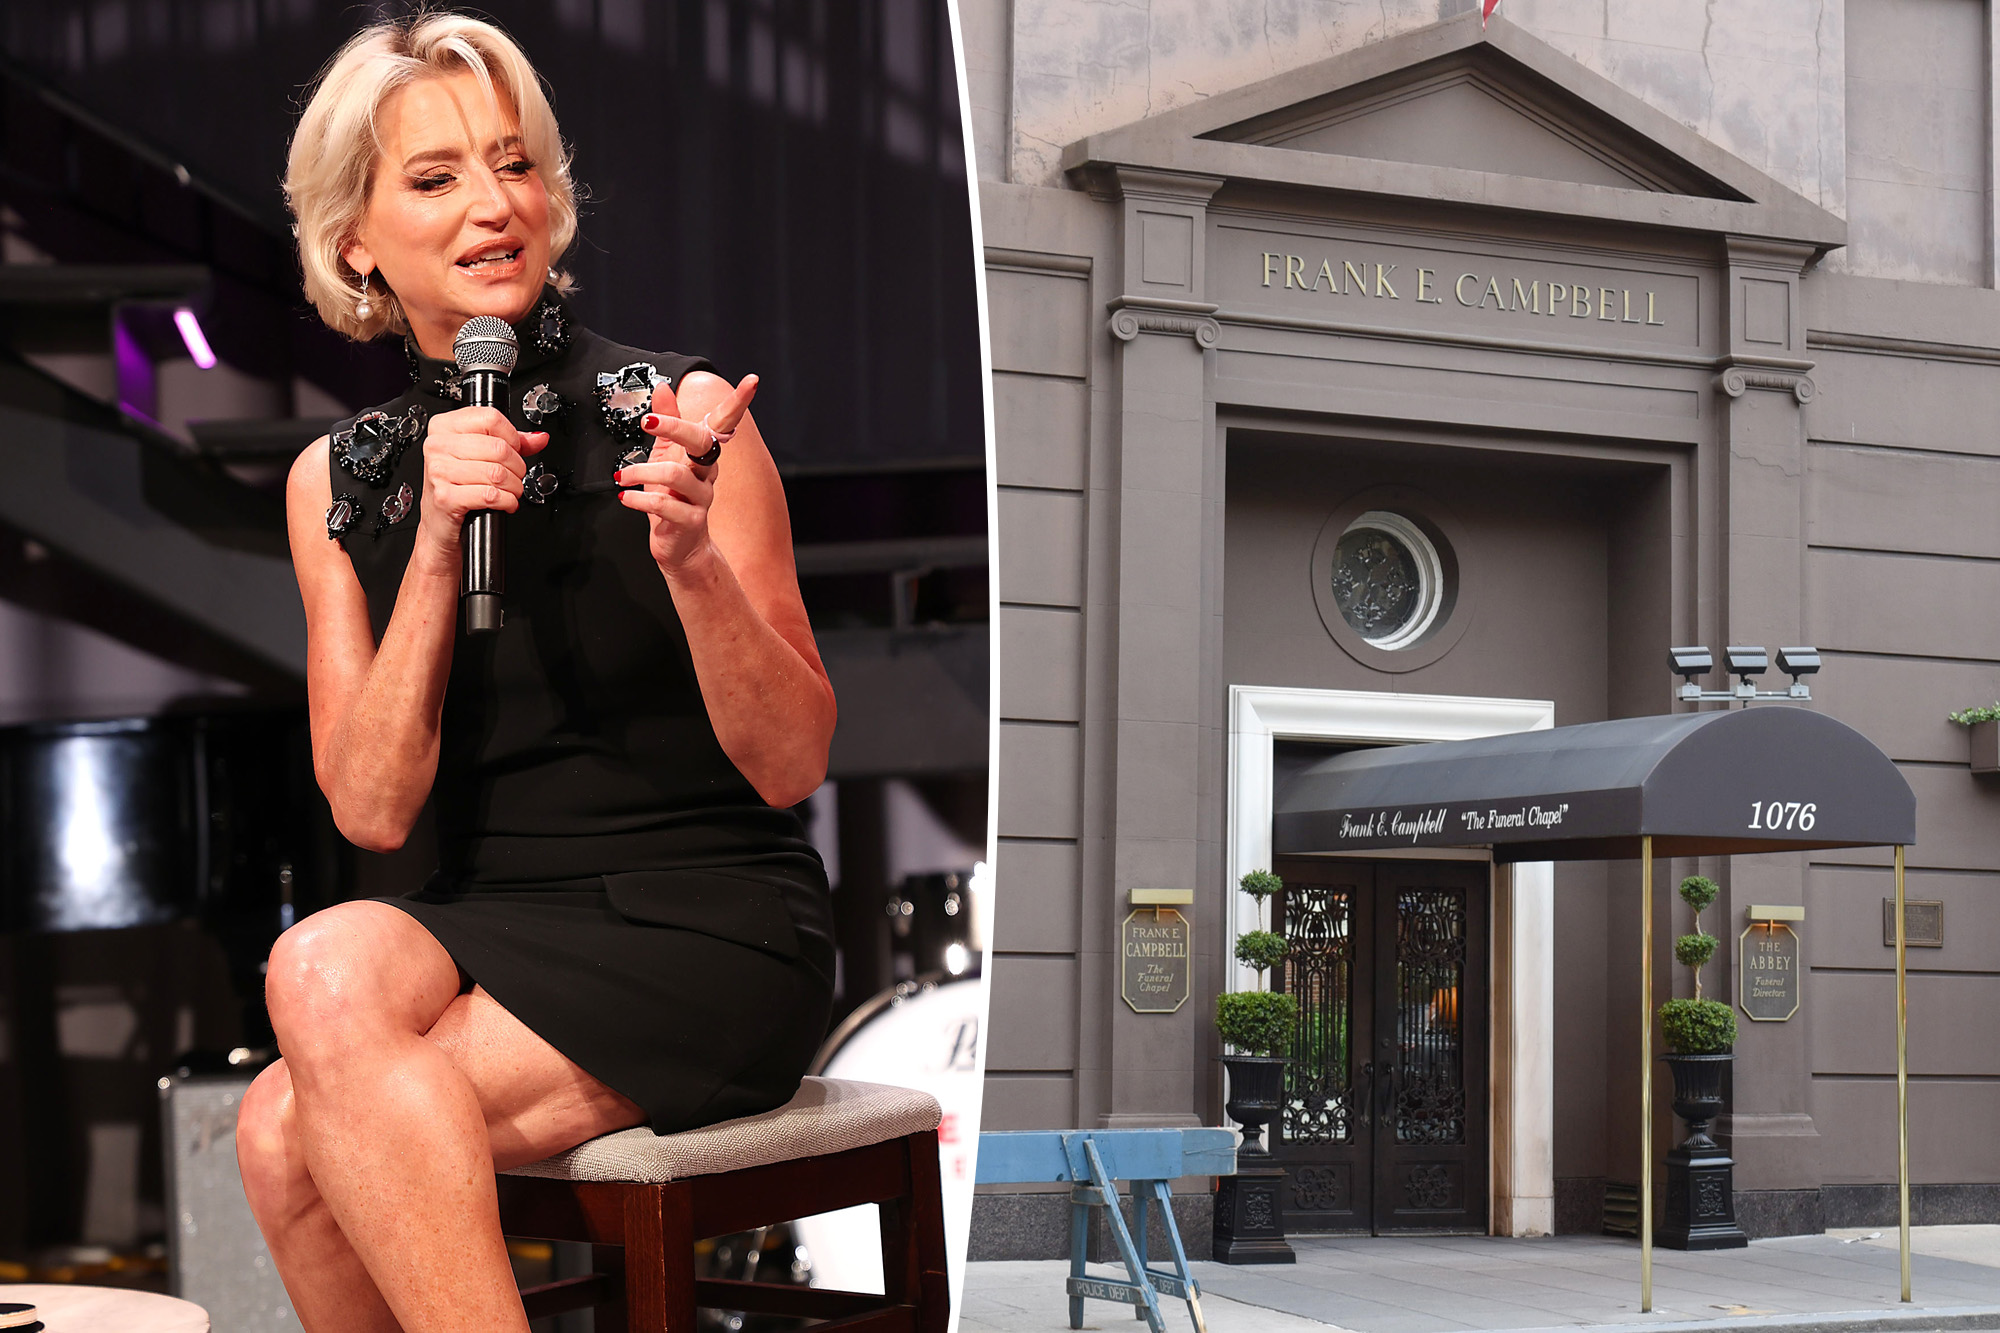 Dorinda Medley's Unconventional Dating Advice: Finding Love at a Funeral Home